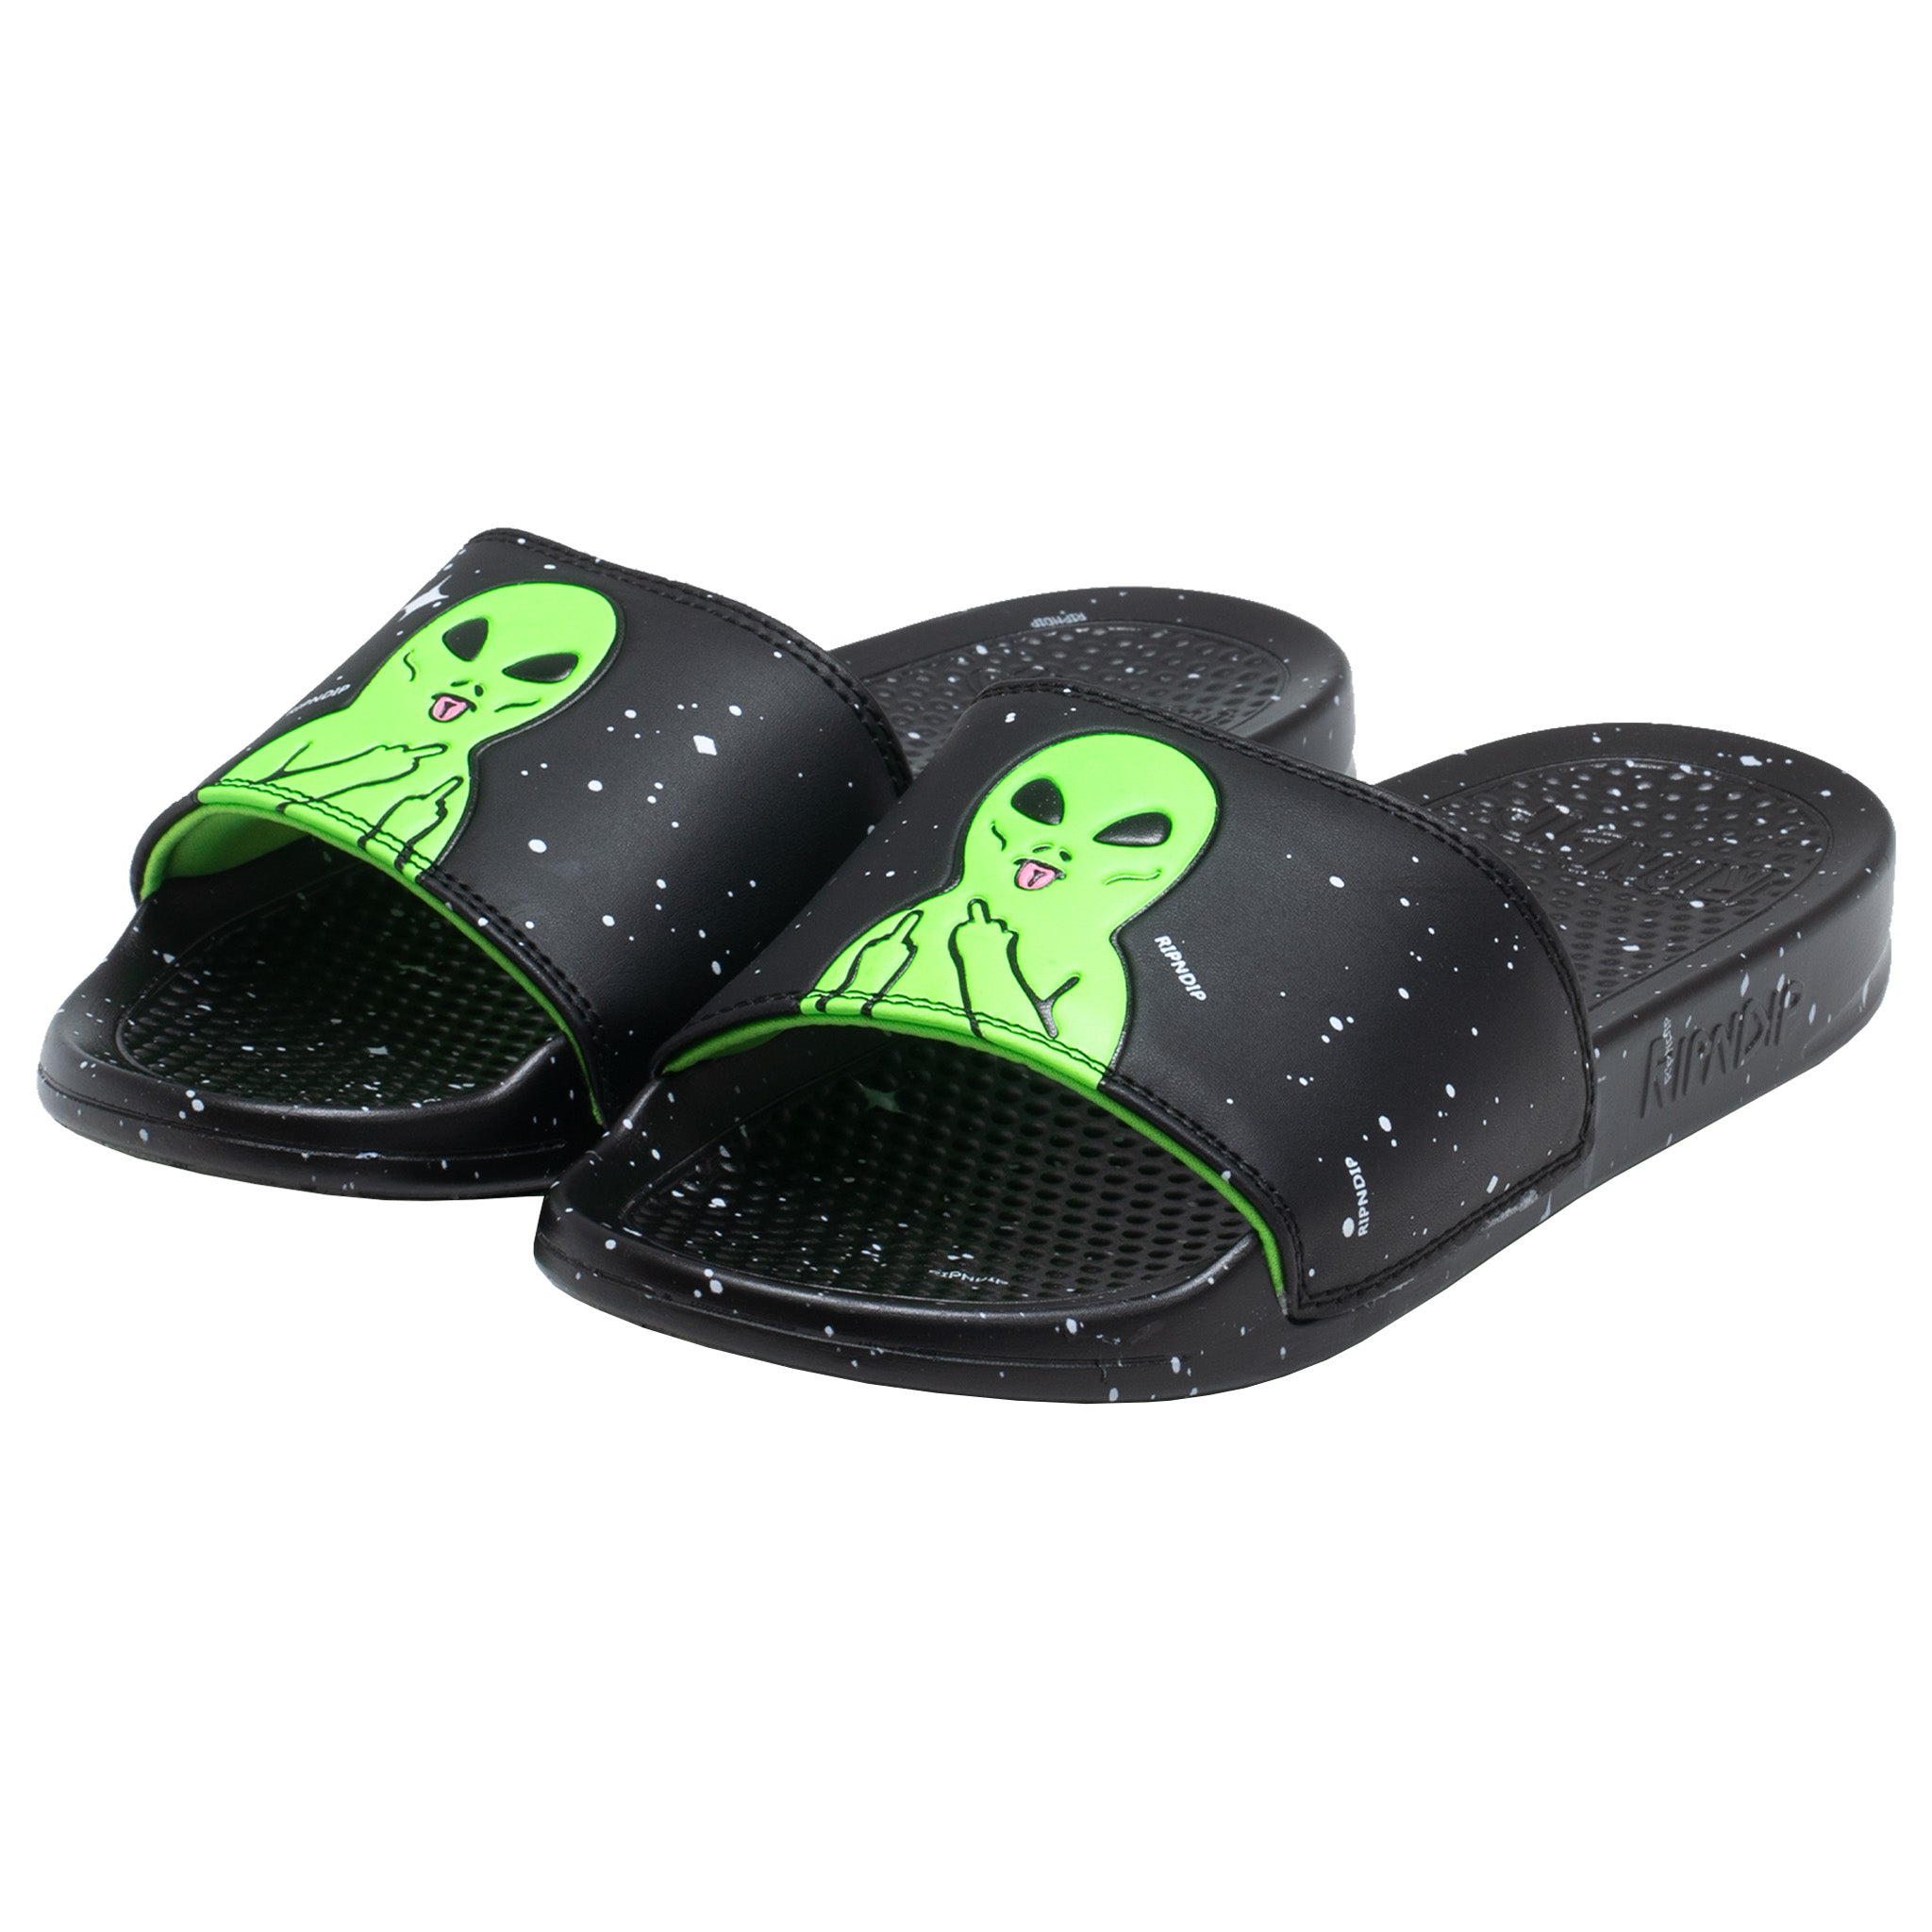 361971 We Out Here Slides (Black/Neon Green)